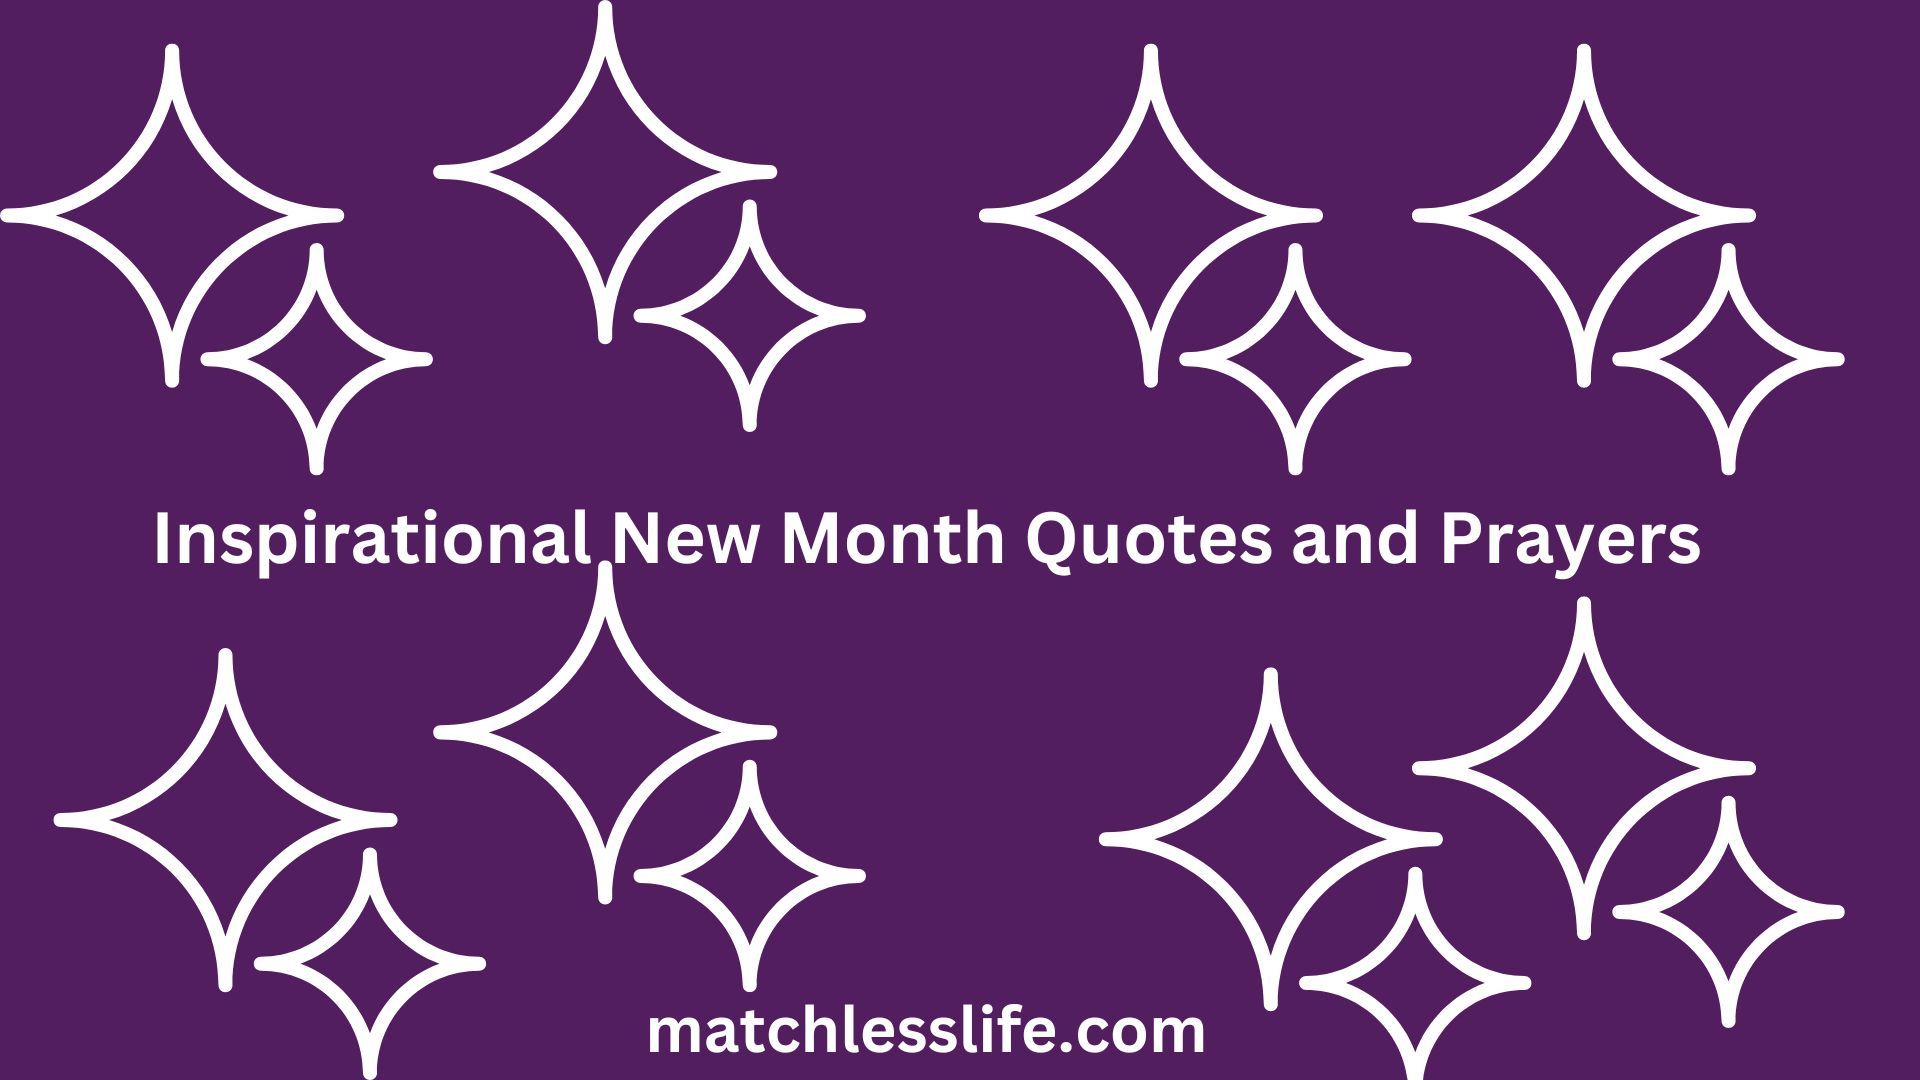 Inspirational New Month Quotes and Prayers